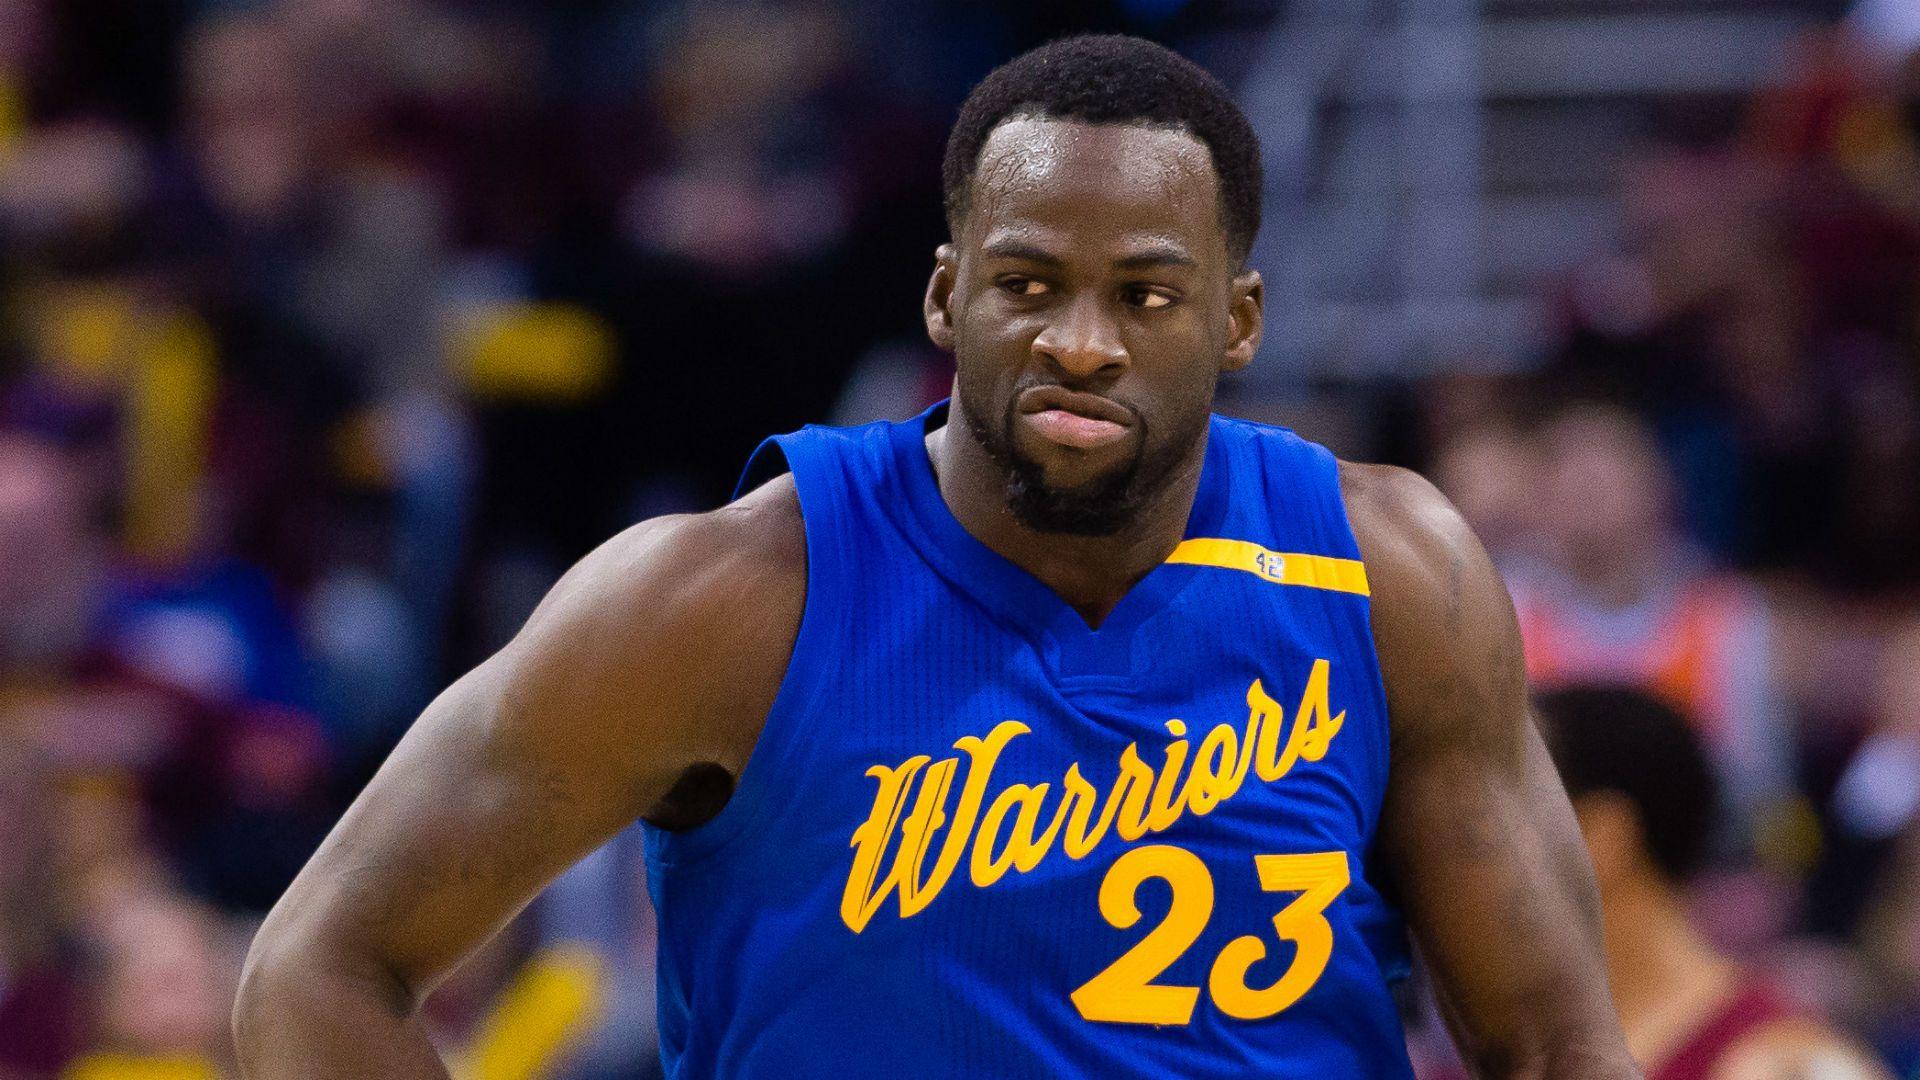 NBA playoffs 2017: Draymond Green wishes East teams would 'compete